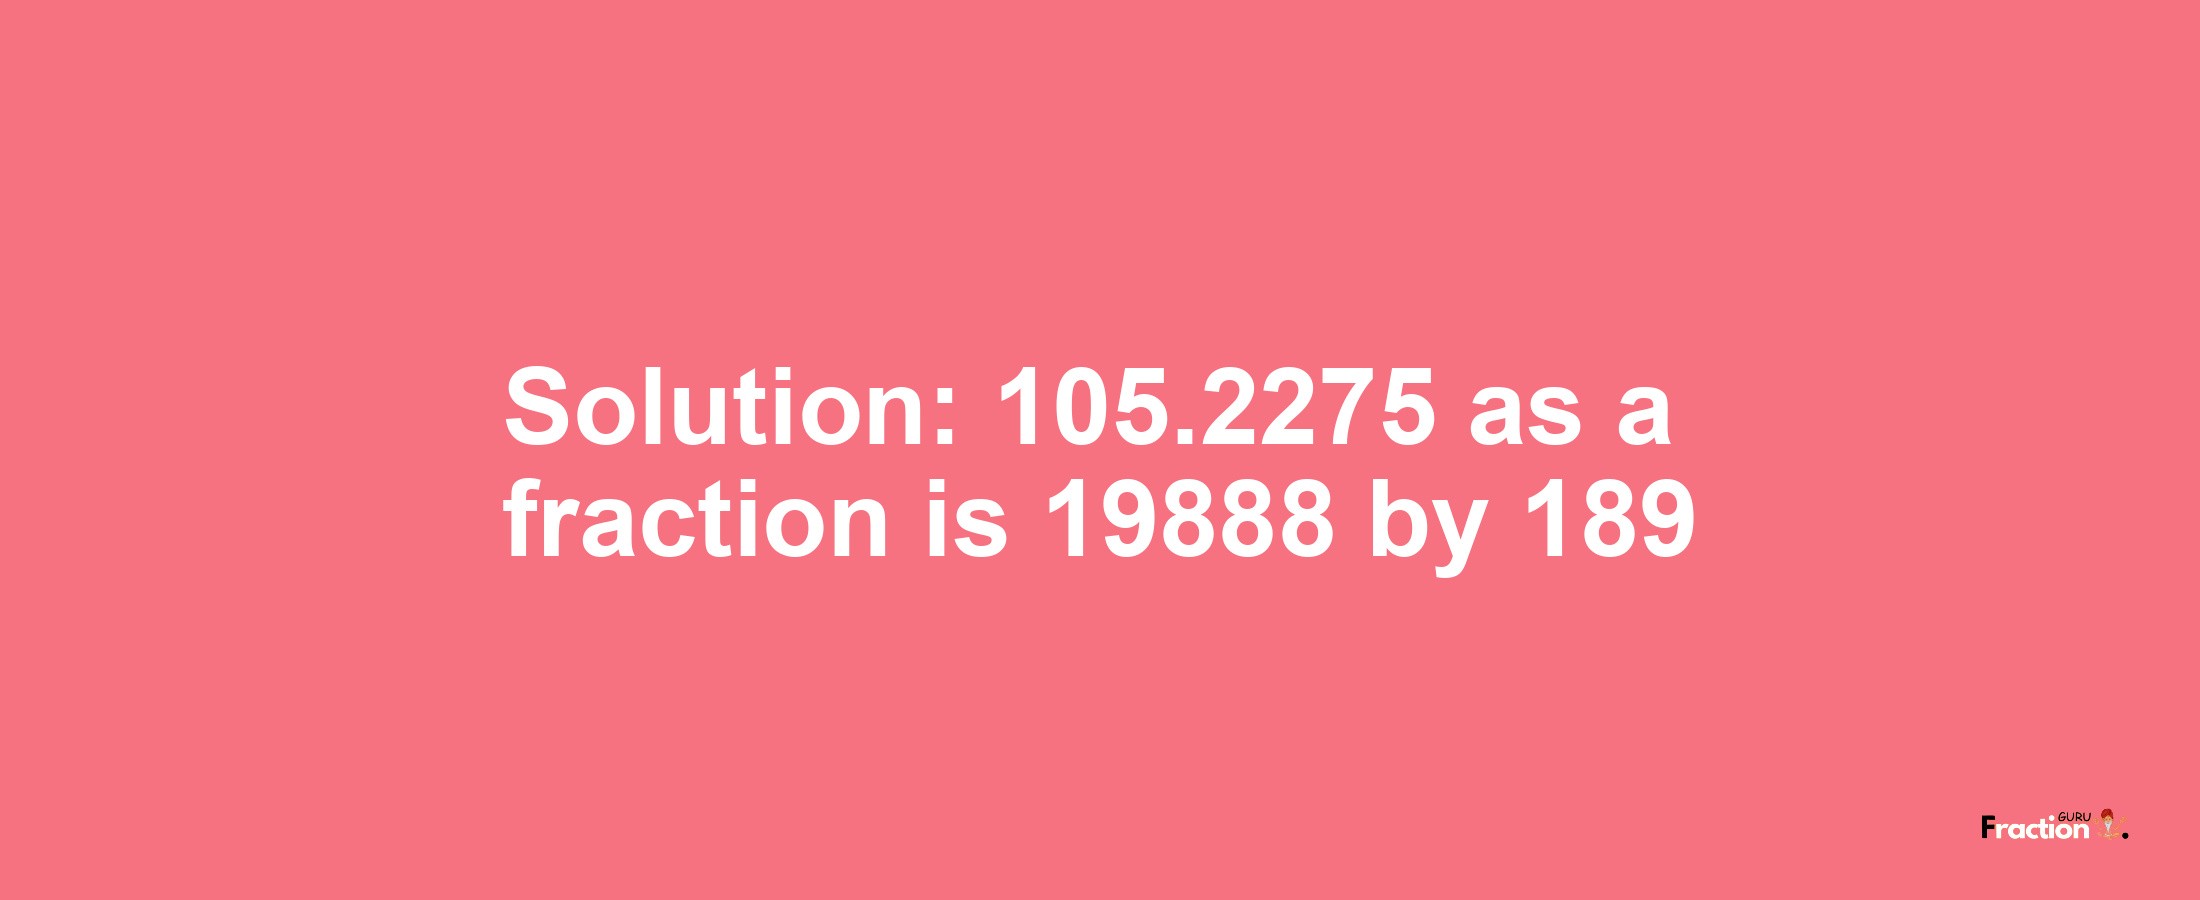 Solution:105.2275 as a fraction is 19888/189